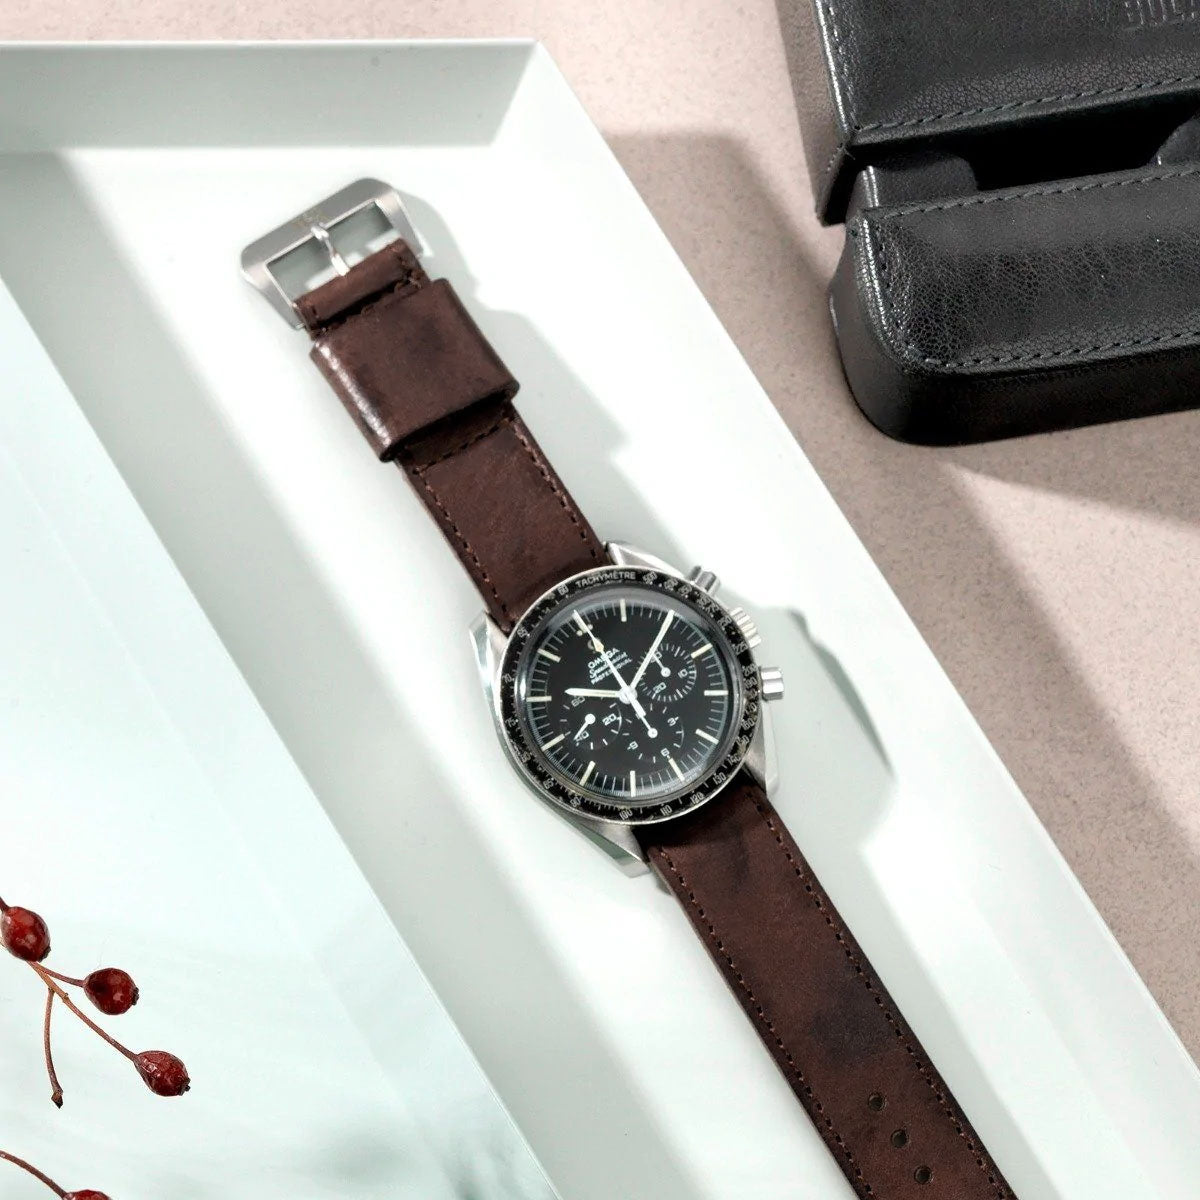 One Piece Nato Brown Lumberjack Leather Watch Strap